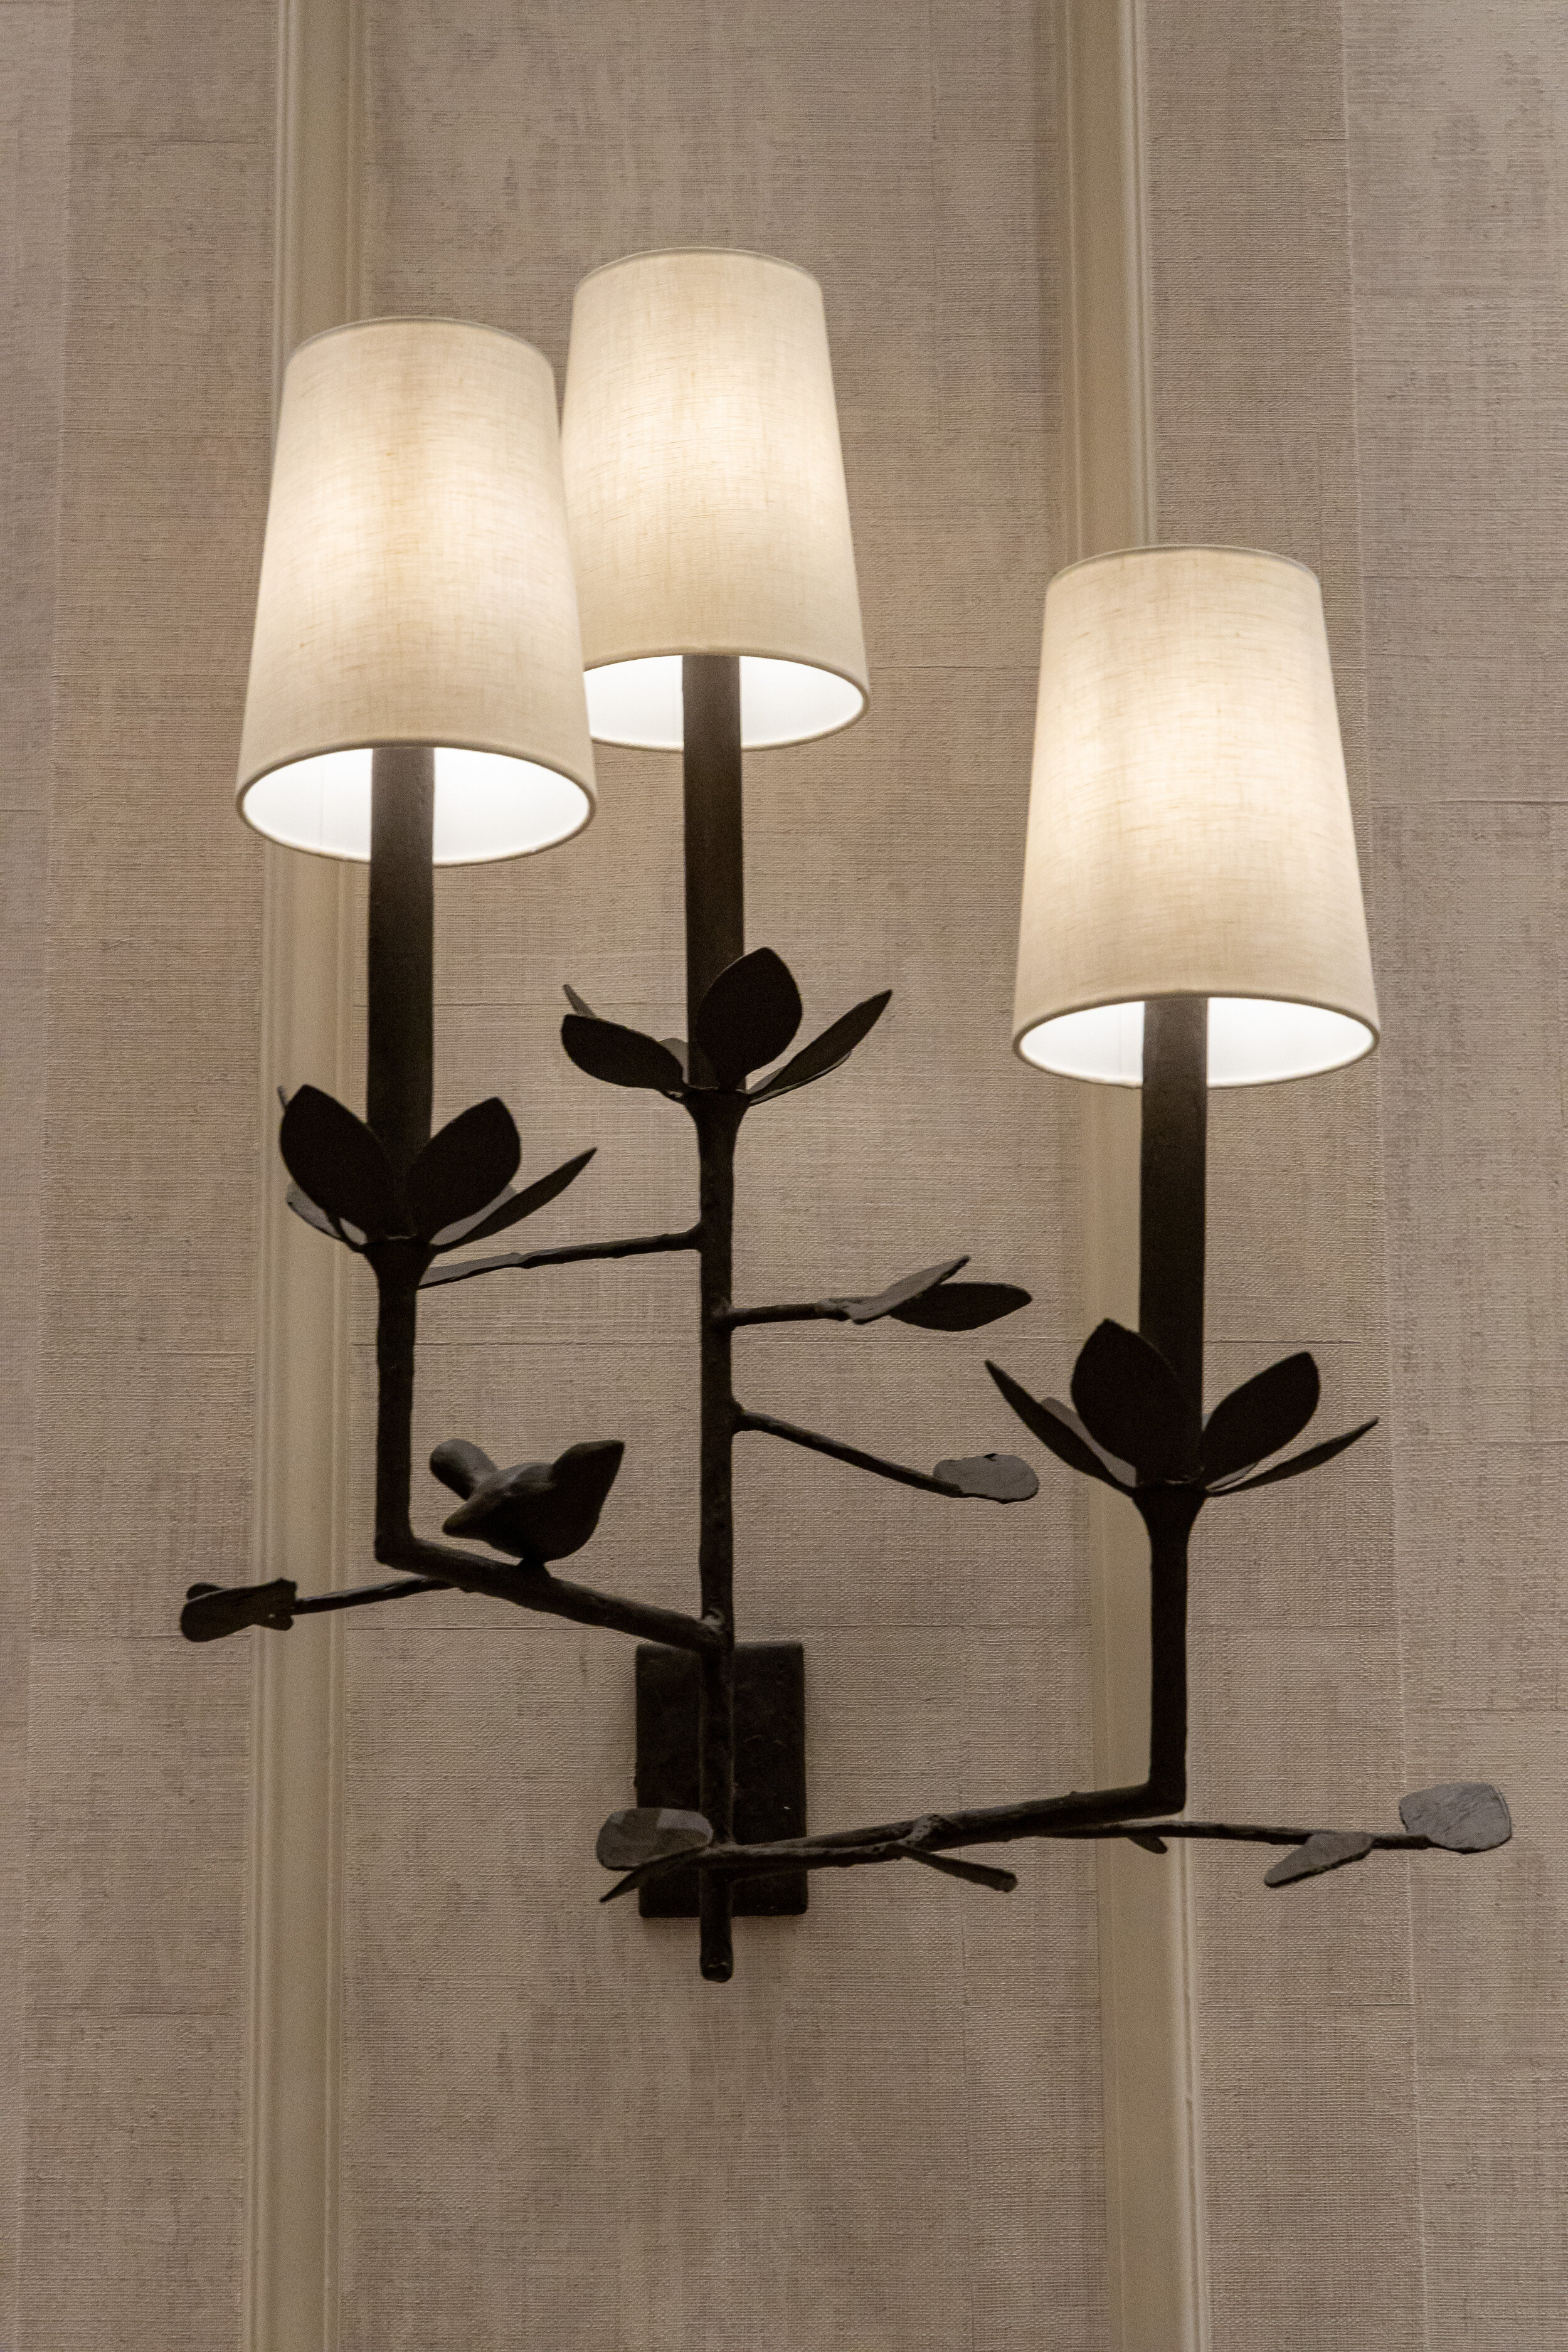 Garden Sconce with Light Shades